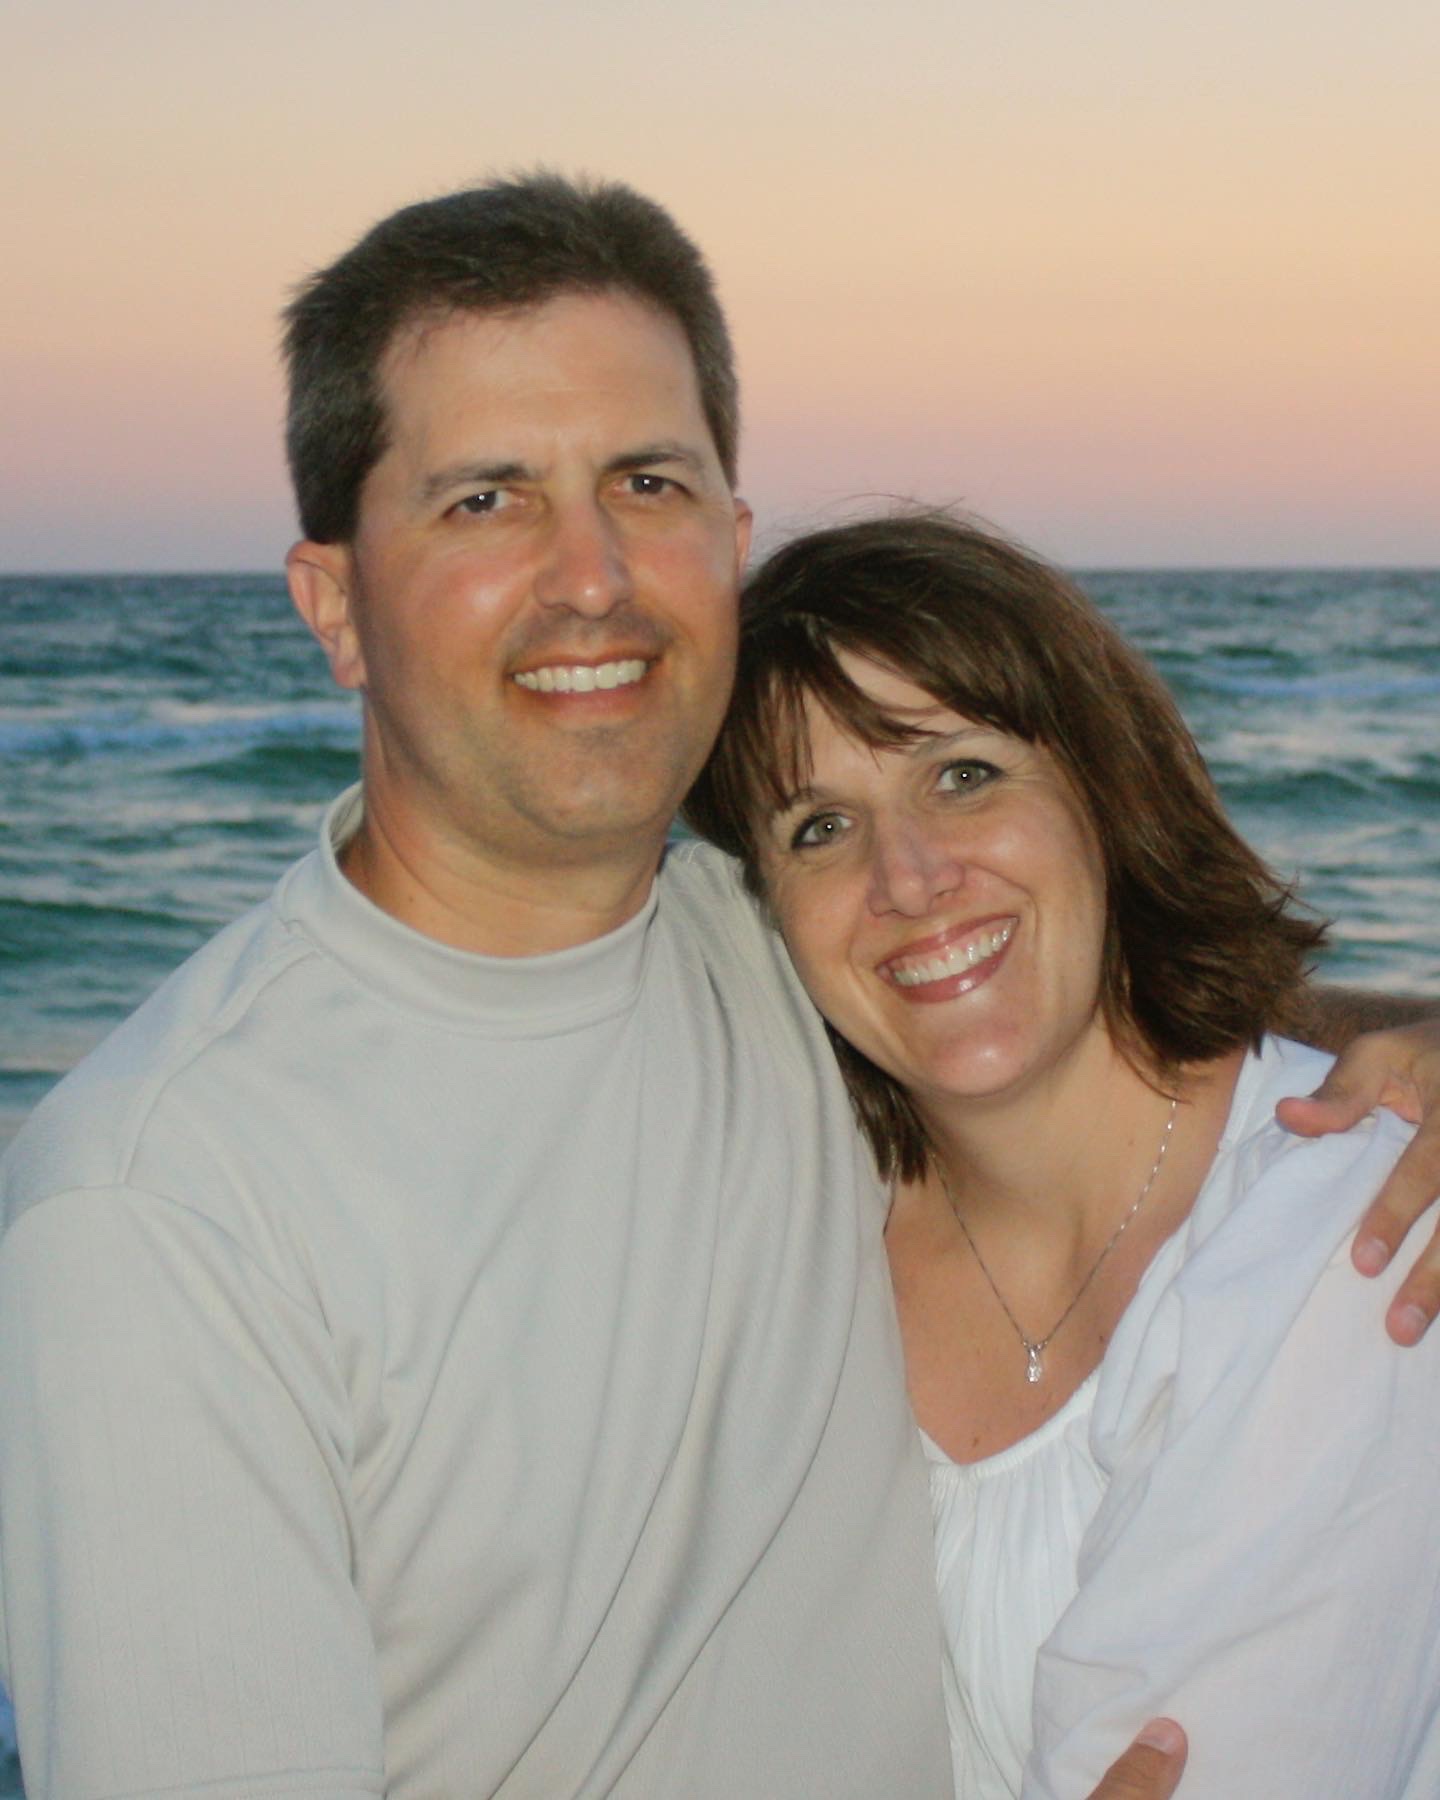 Todd and Brenda Edwards